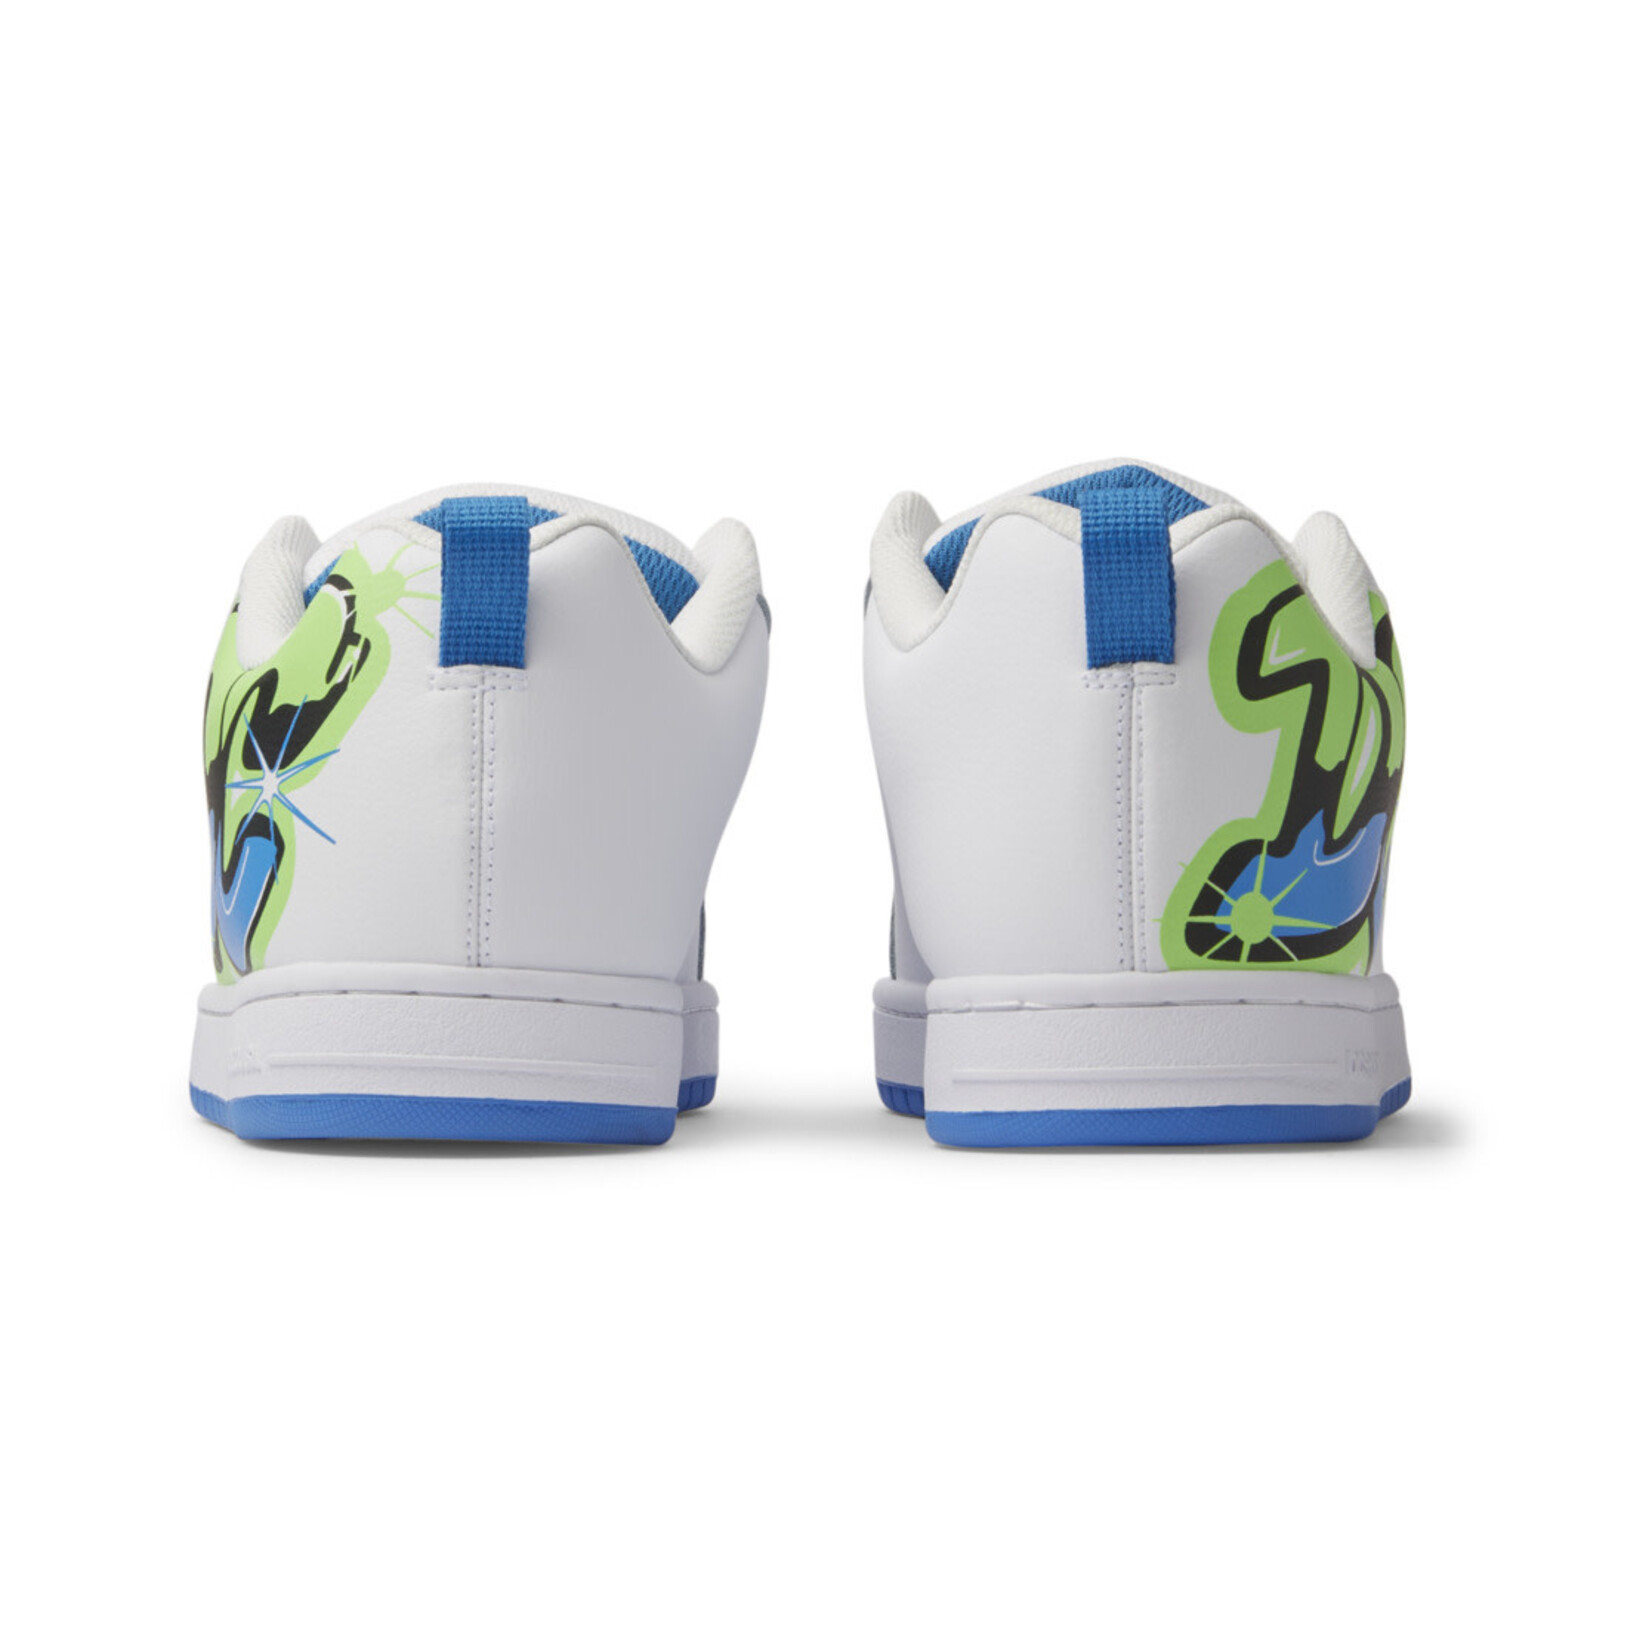 DCSHOES COURT GARFFIK - Chaussures - DC SHOES White/Lime/Turquoise